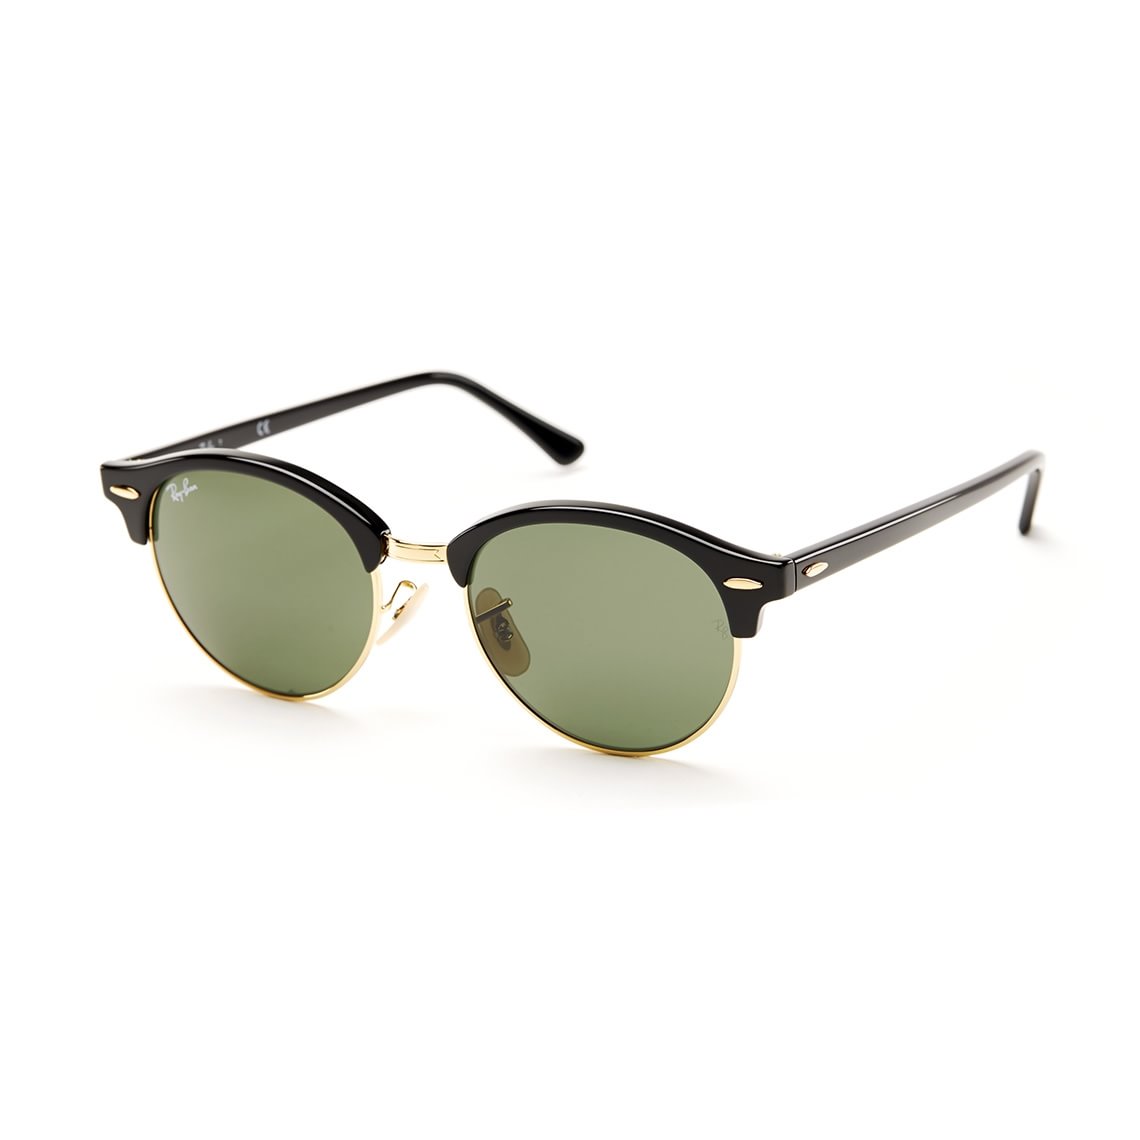 Ray-Ban Clubround RB4246 901 51